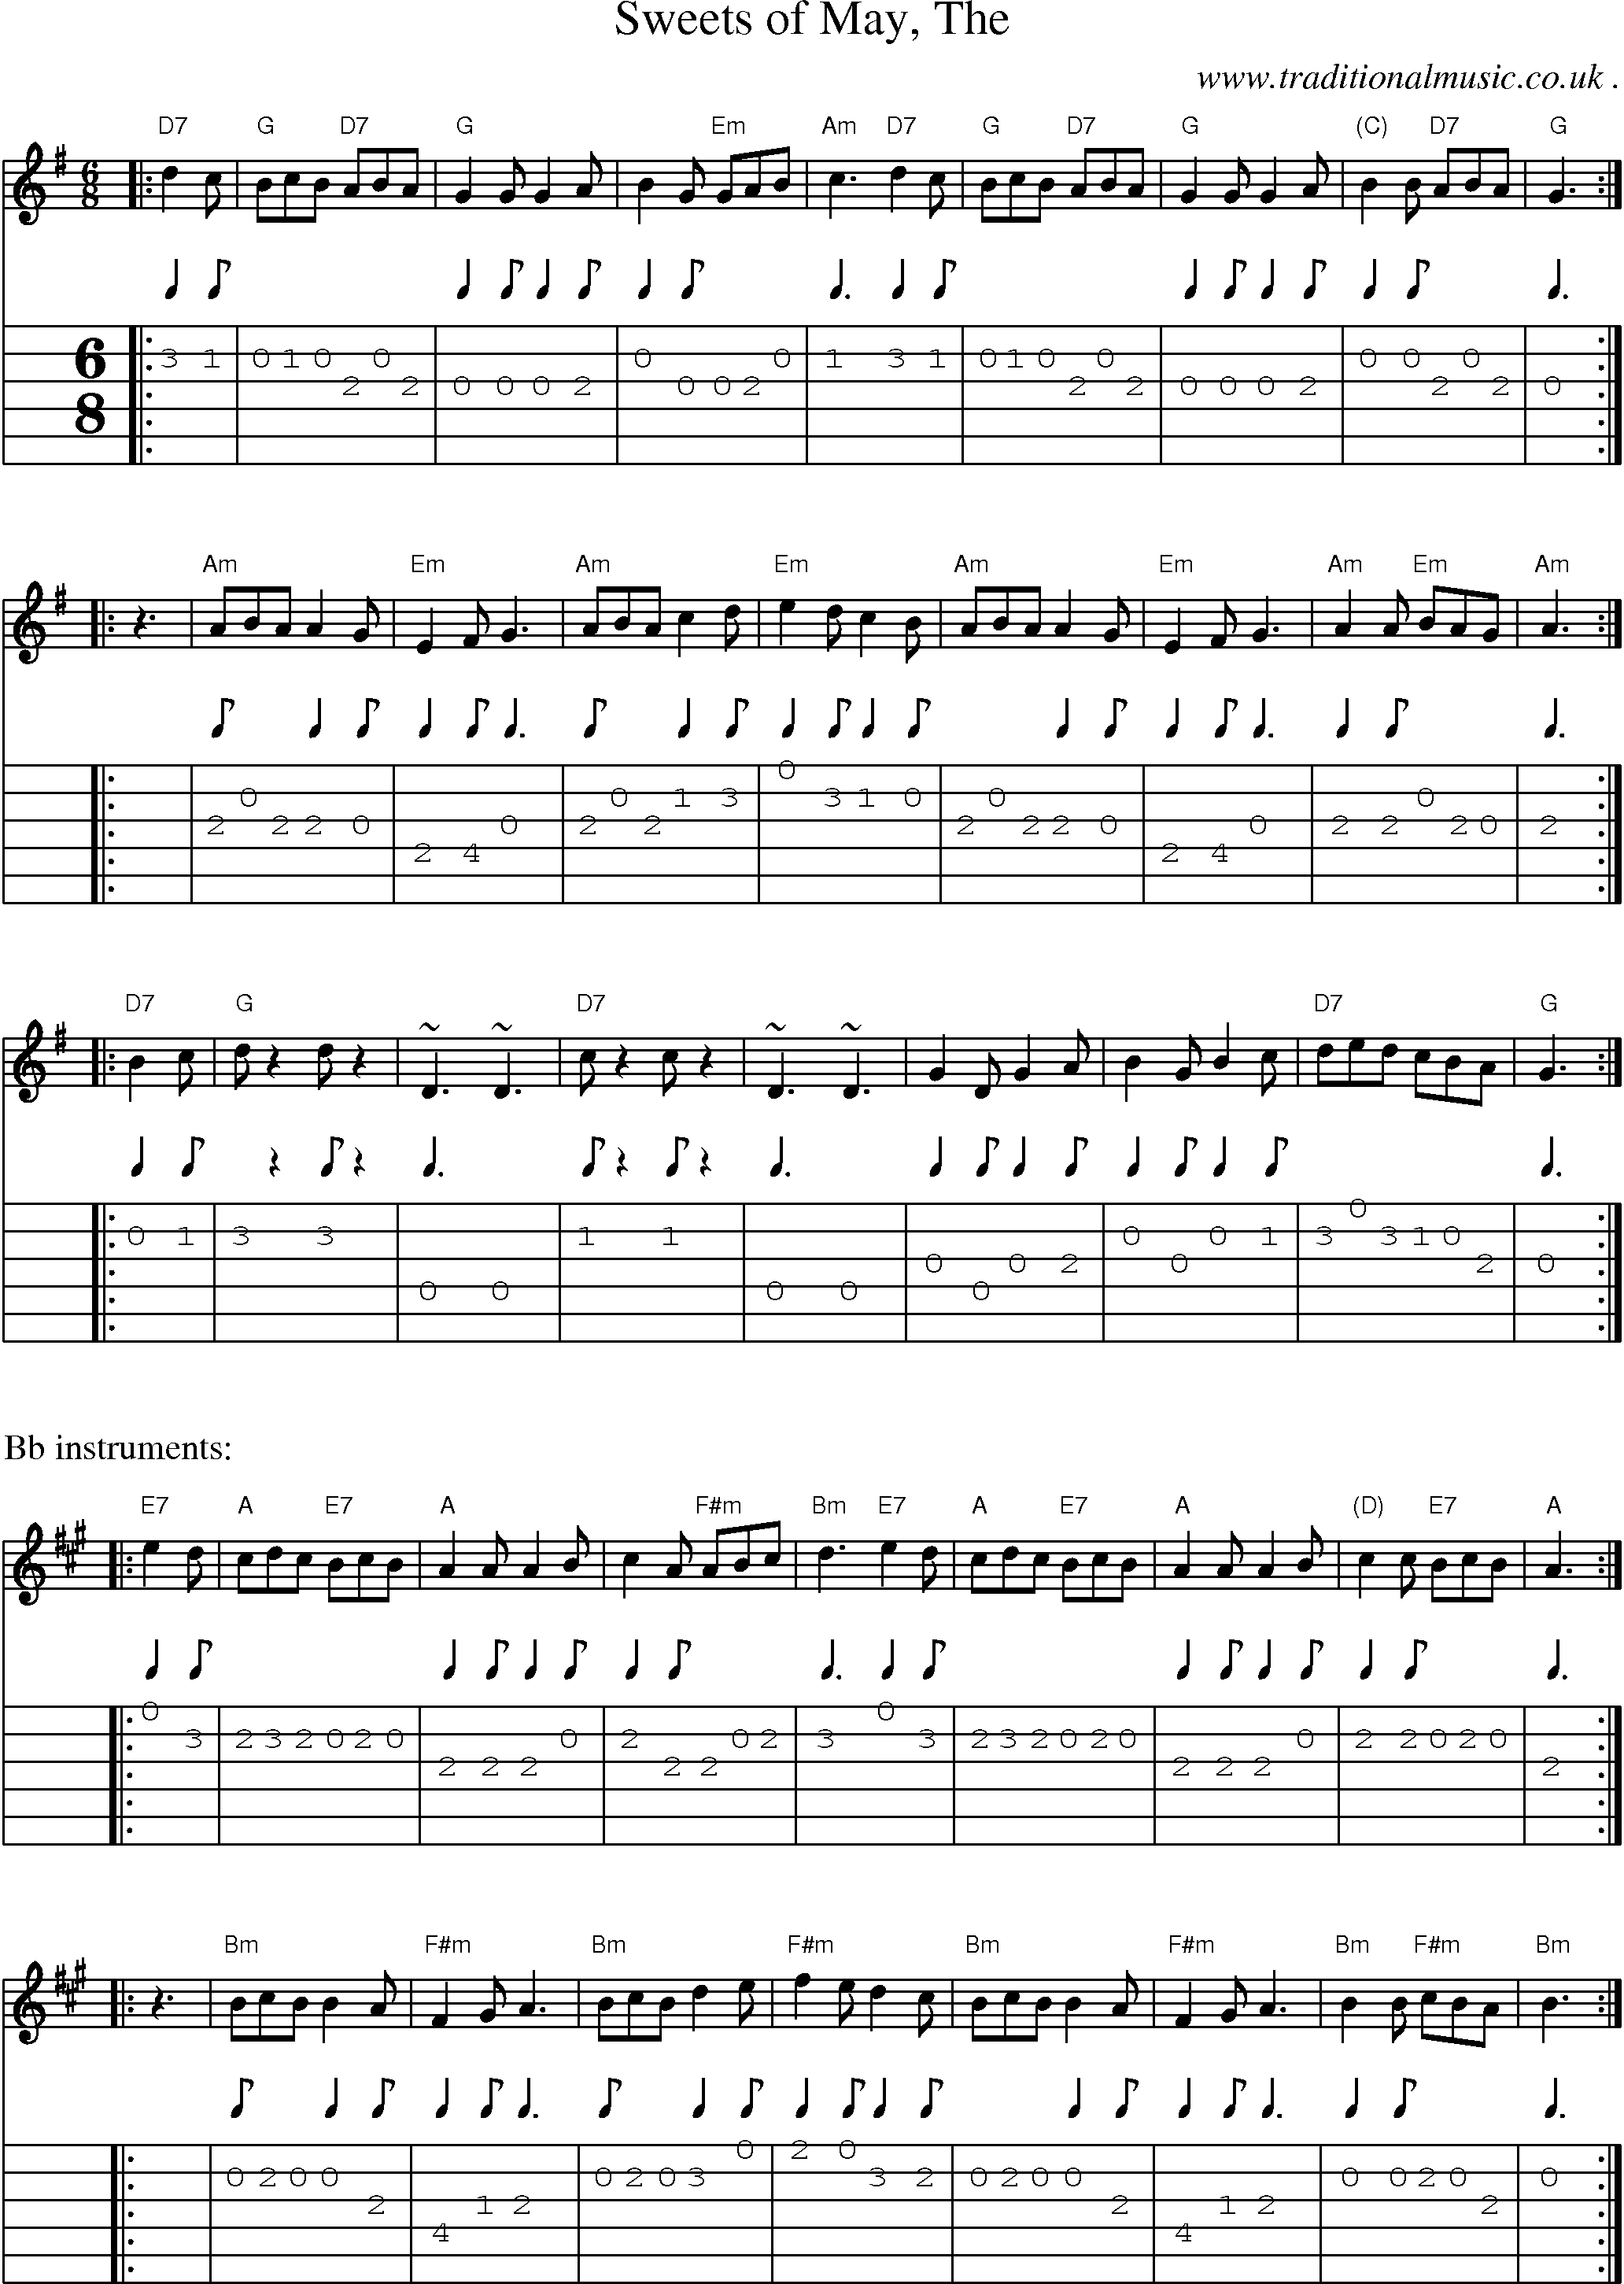 Sheet-music  score, Chords and Guitar Tabs for Sweets Of May The